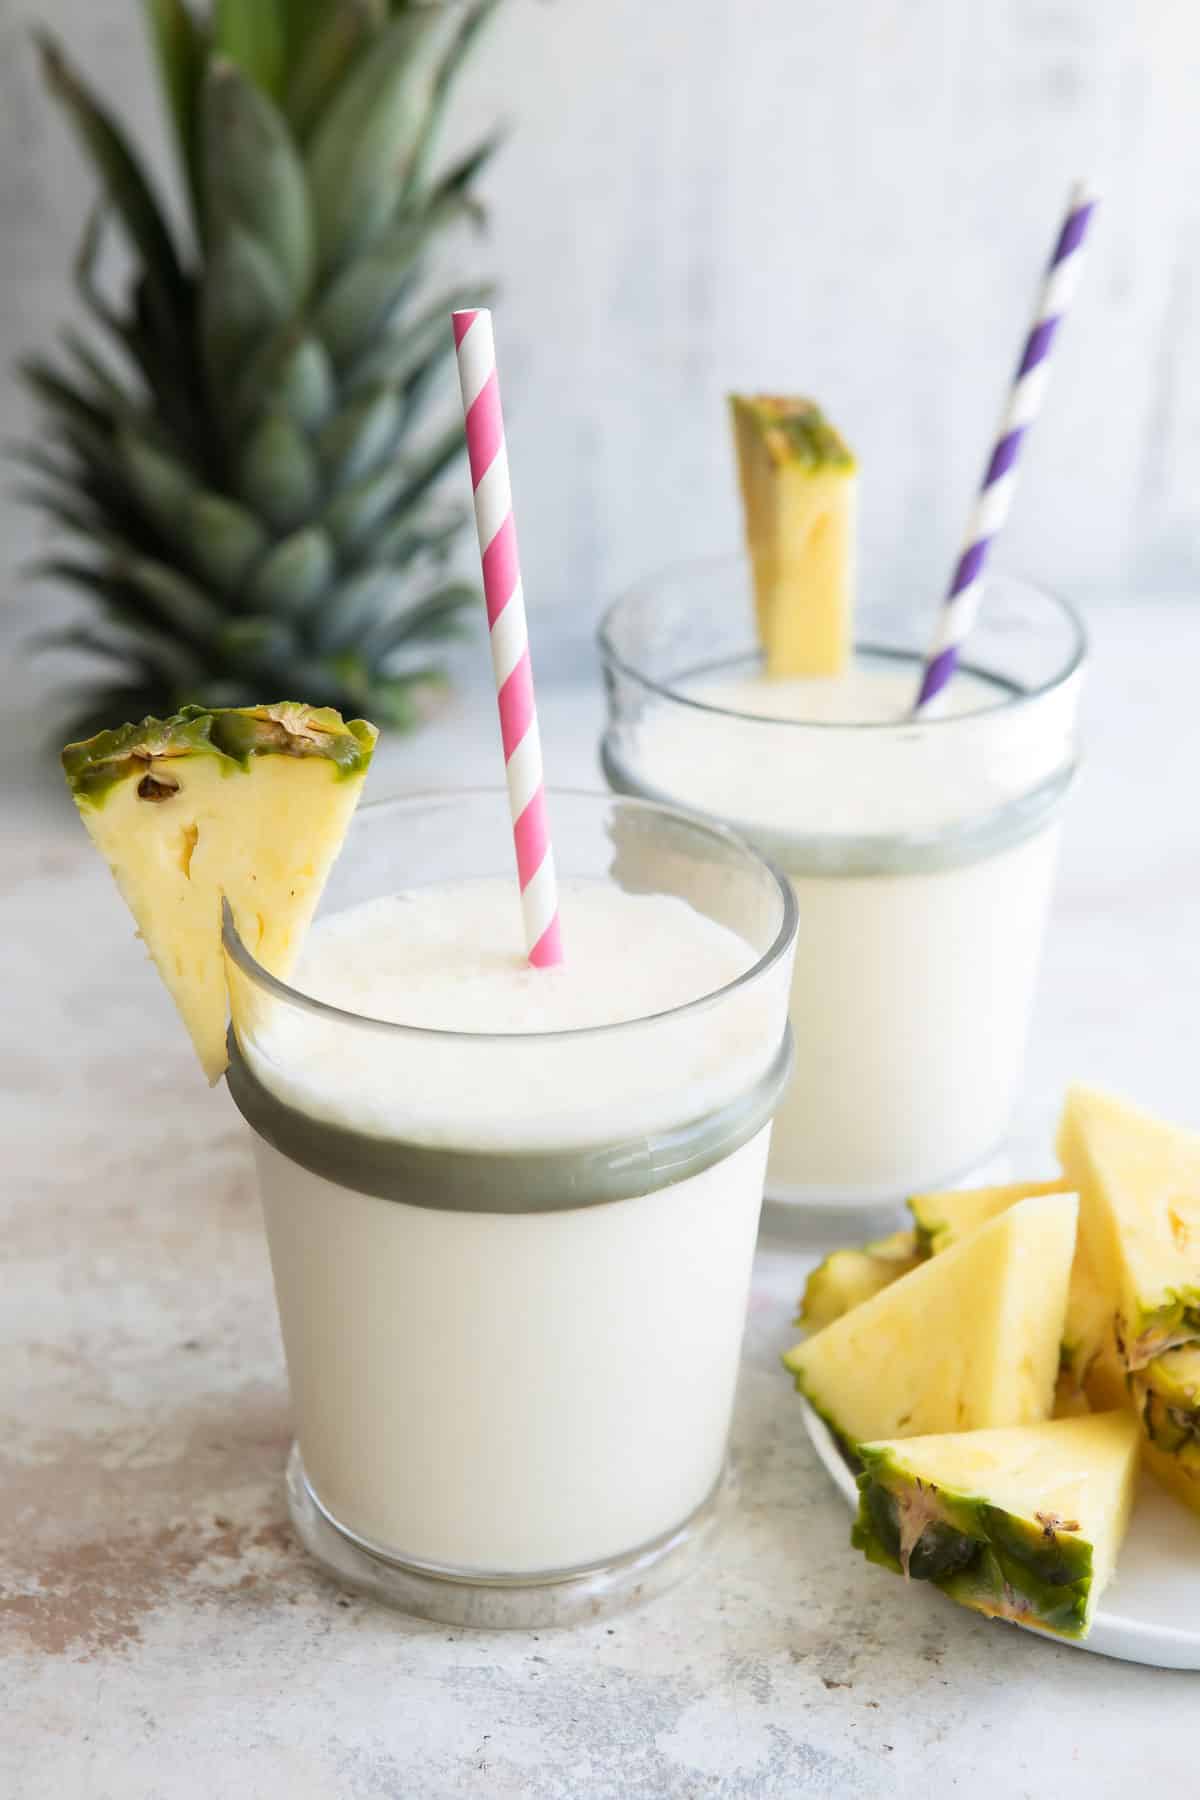 2 Pineapple Smoothies in glasses with striped straws.